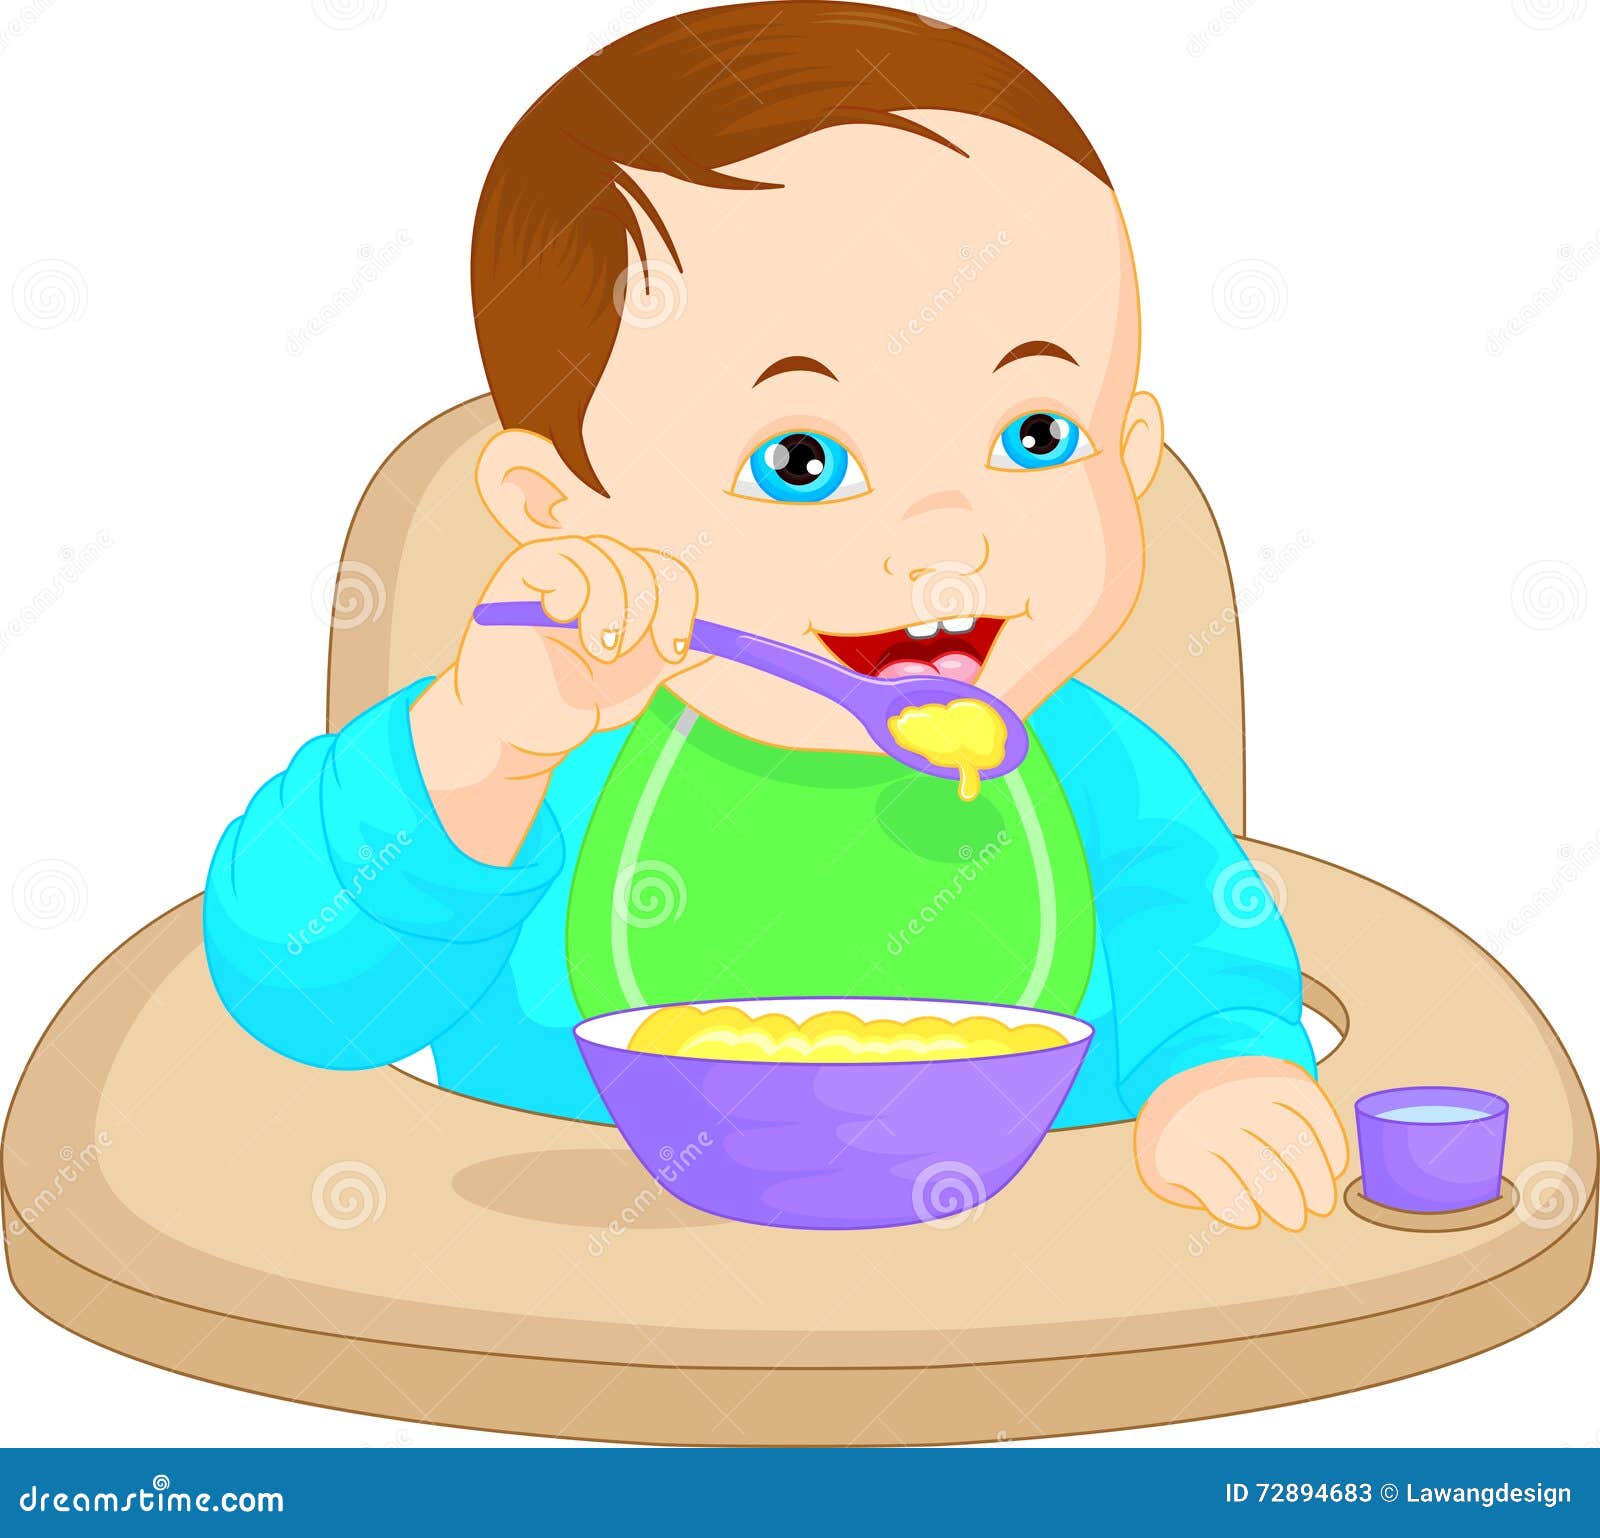 Baby Eating Stock Illustrations – 10,020 Baby Eating Stock Illustrations,  Vectors & Clipart - Dreamstime